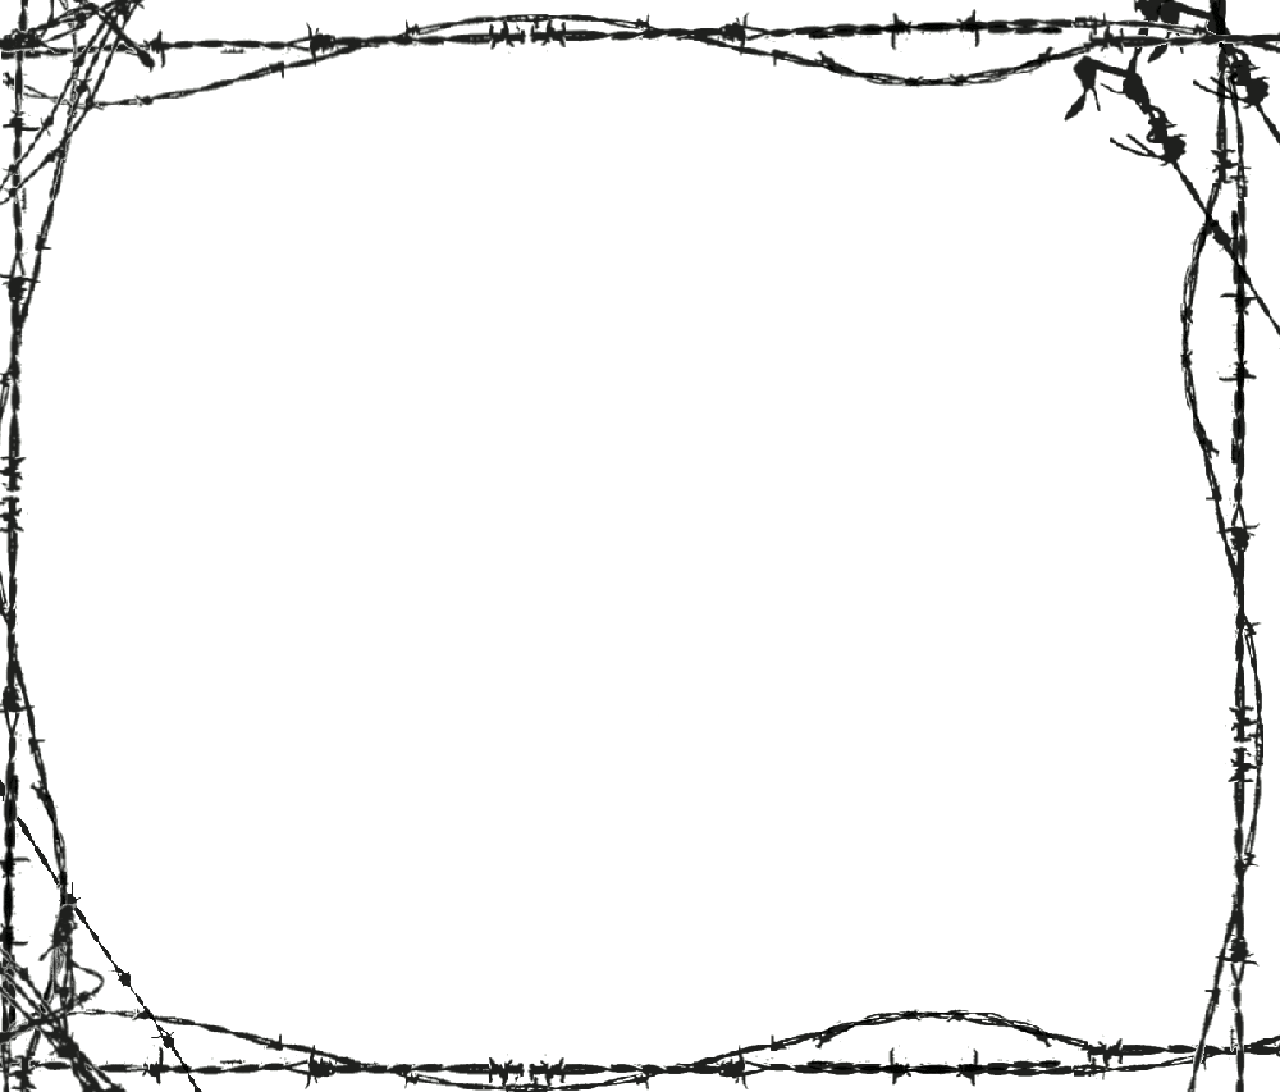 barb wire borders | Barbed Wi